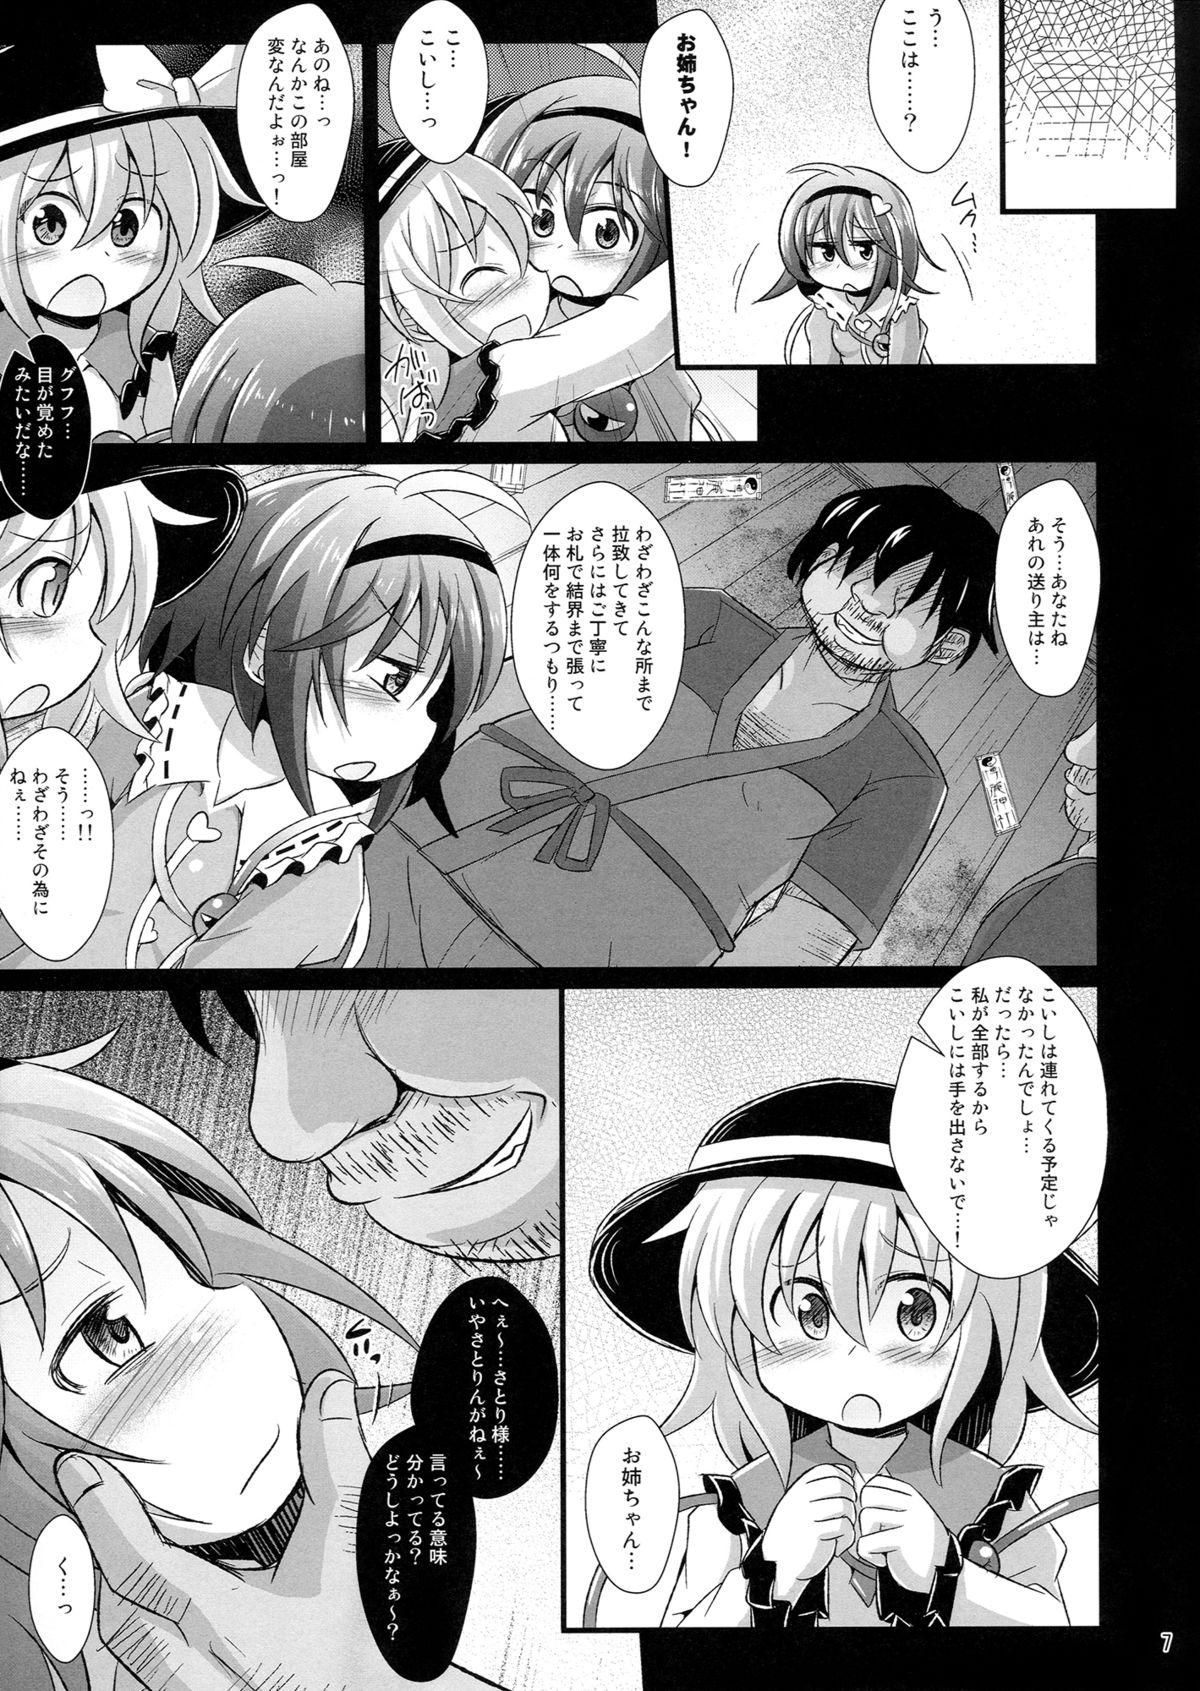 Sister Immoral Desire - Touhou project Exhibition - Page 6